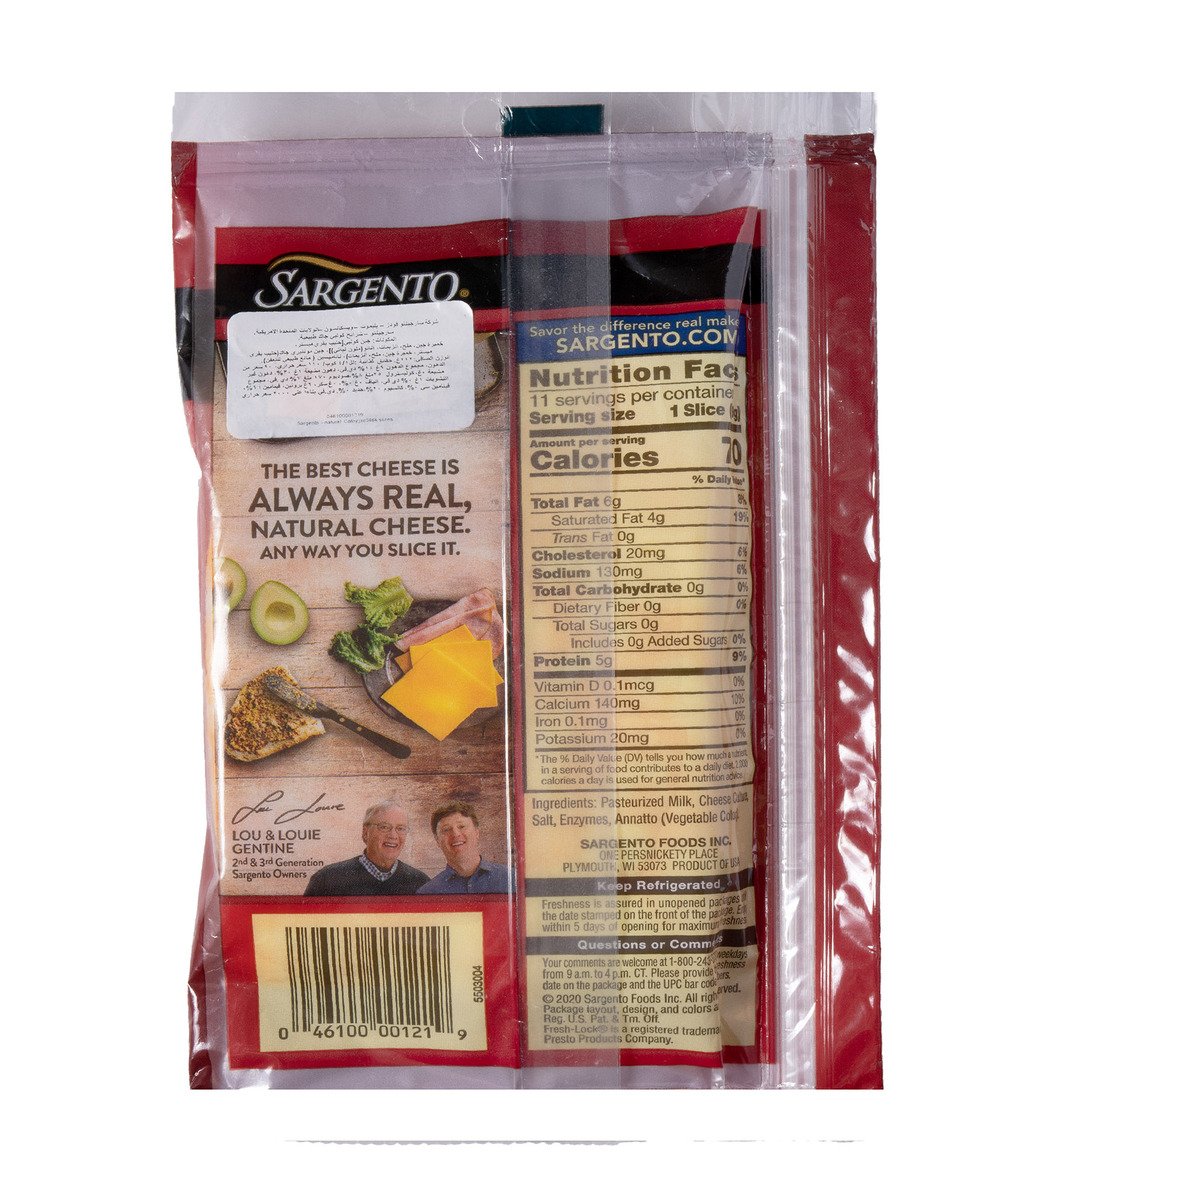 Sargento Colby-Jack Natural Cheese 212 g